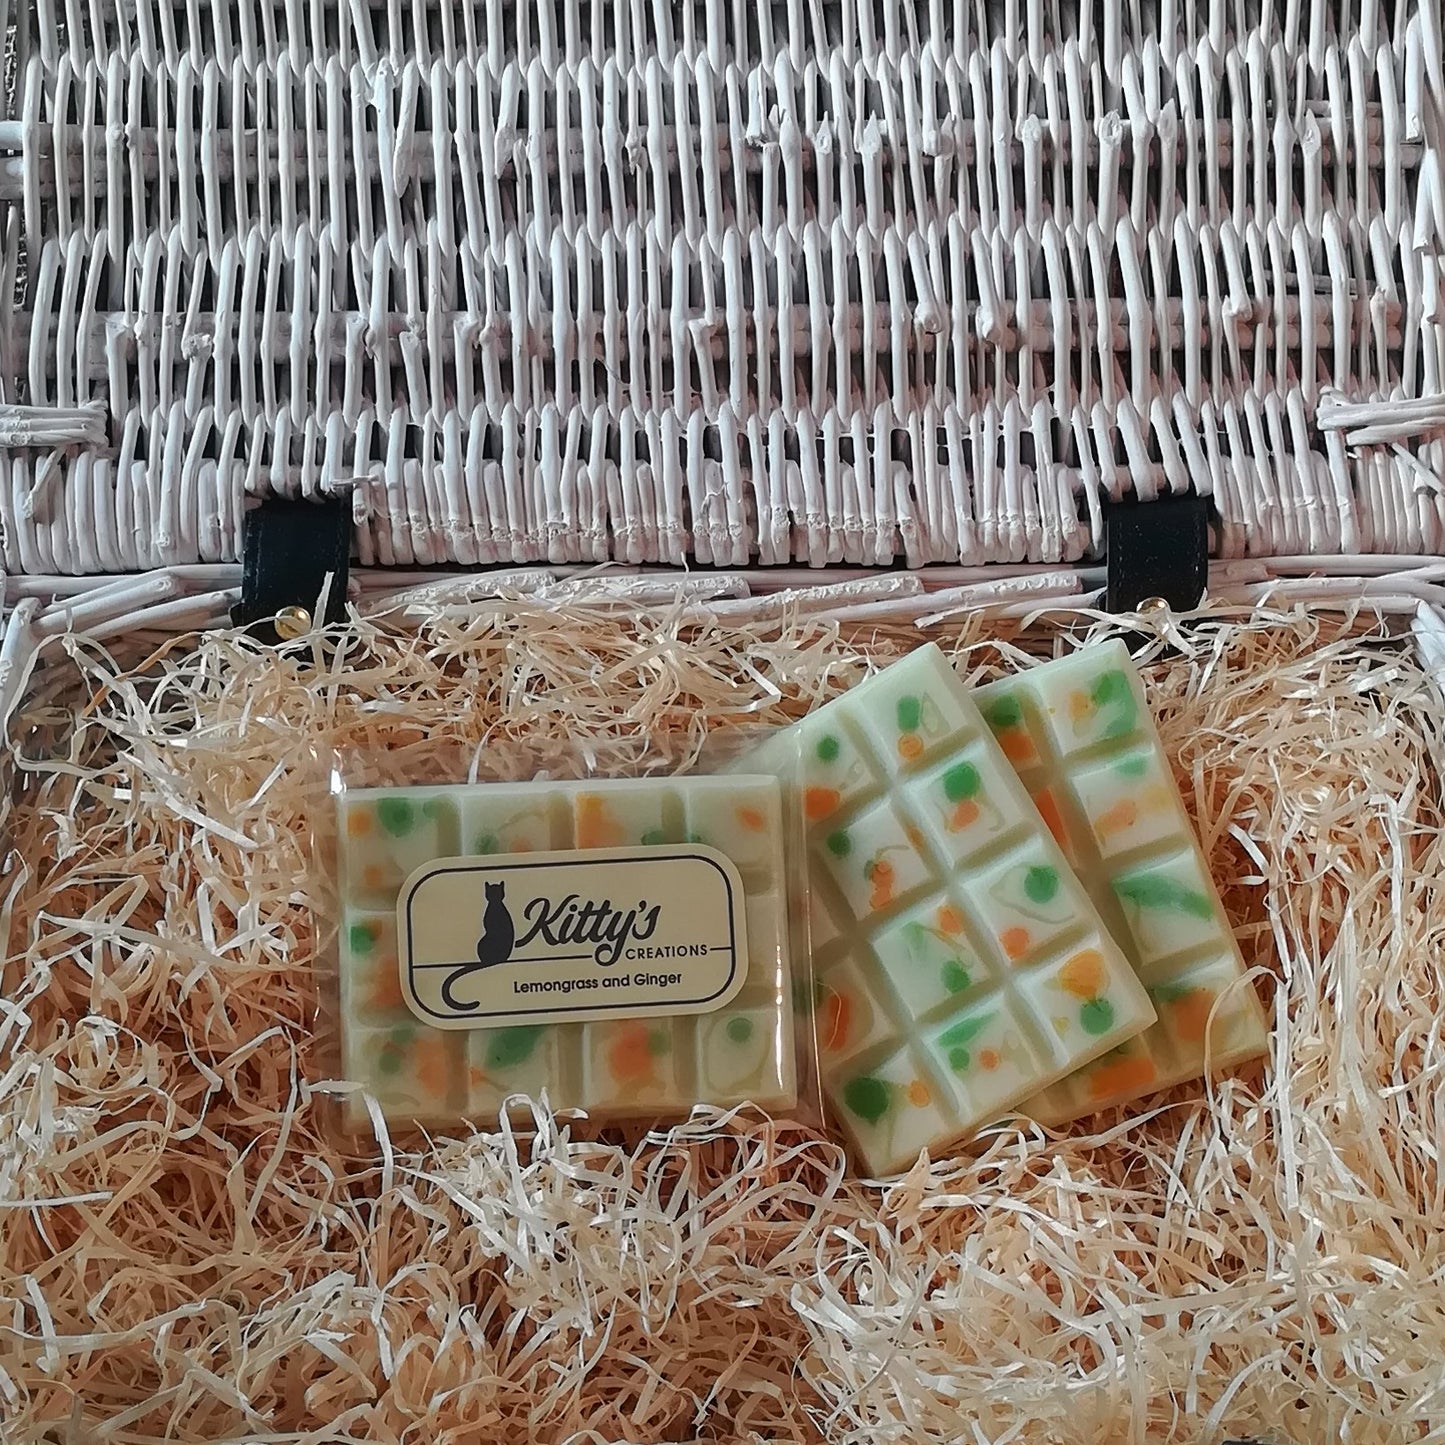 Three hand-made rectangular Wax Melts. Each is a light delicate green, overlaid with orange and forest green speckles and spots they are resting in a basket of straw. Each melt bursting with the mild and delicate fragrance of Lemongrass matched with the zesty freshness of ginger, combined to awaken your senses.